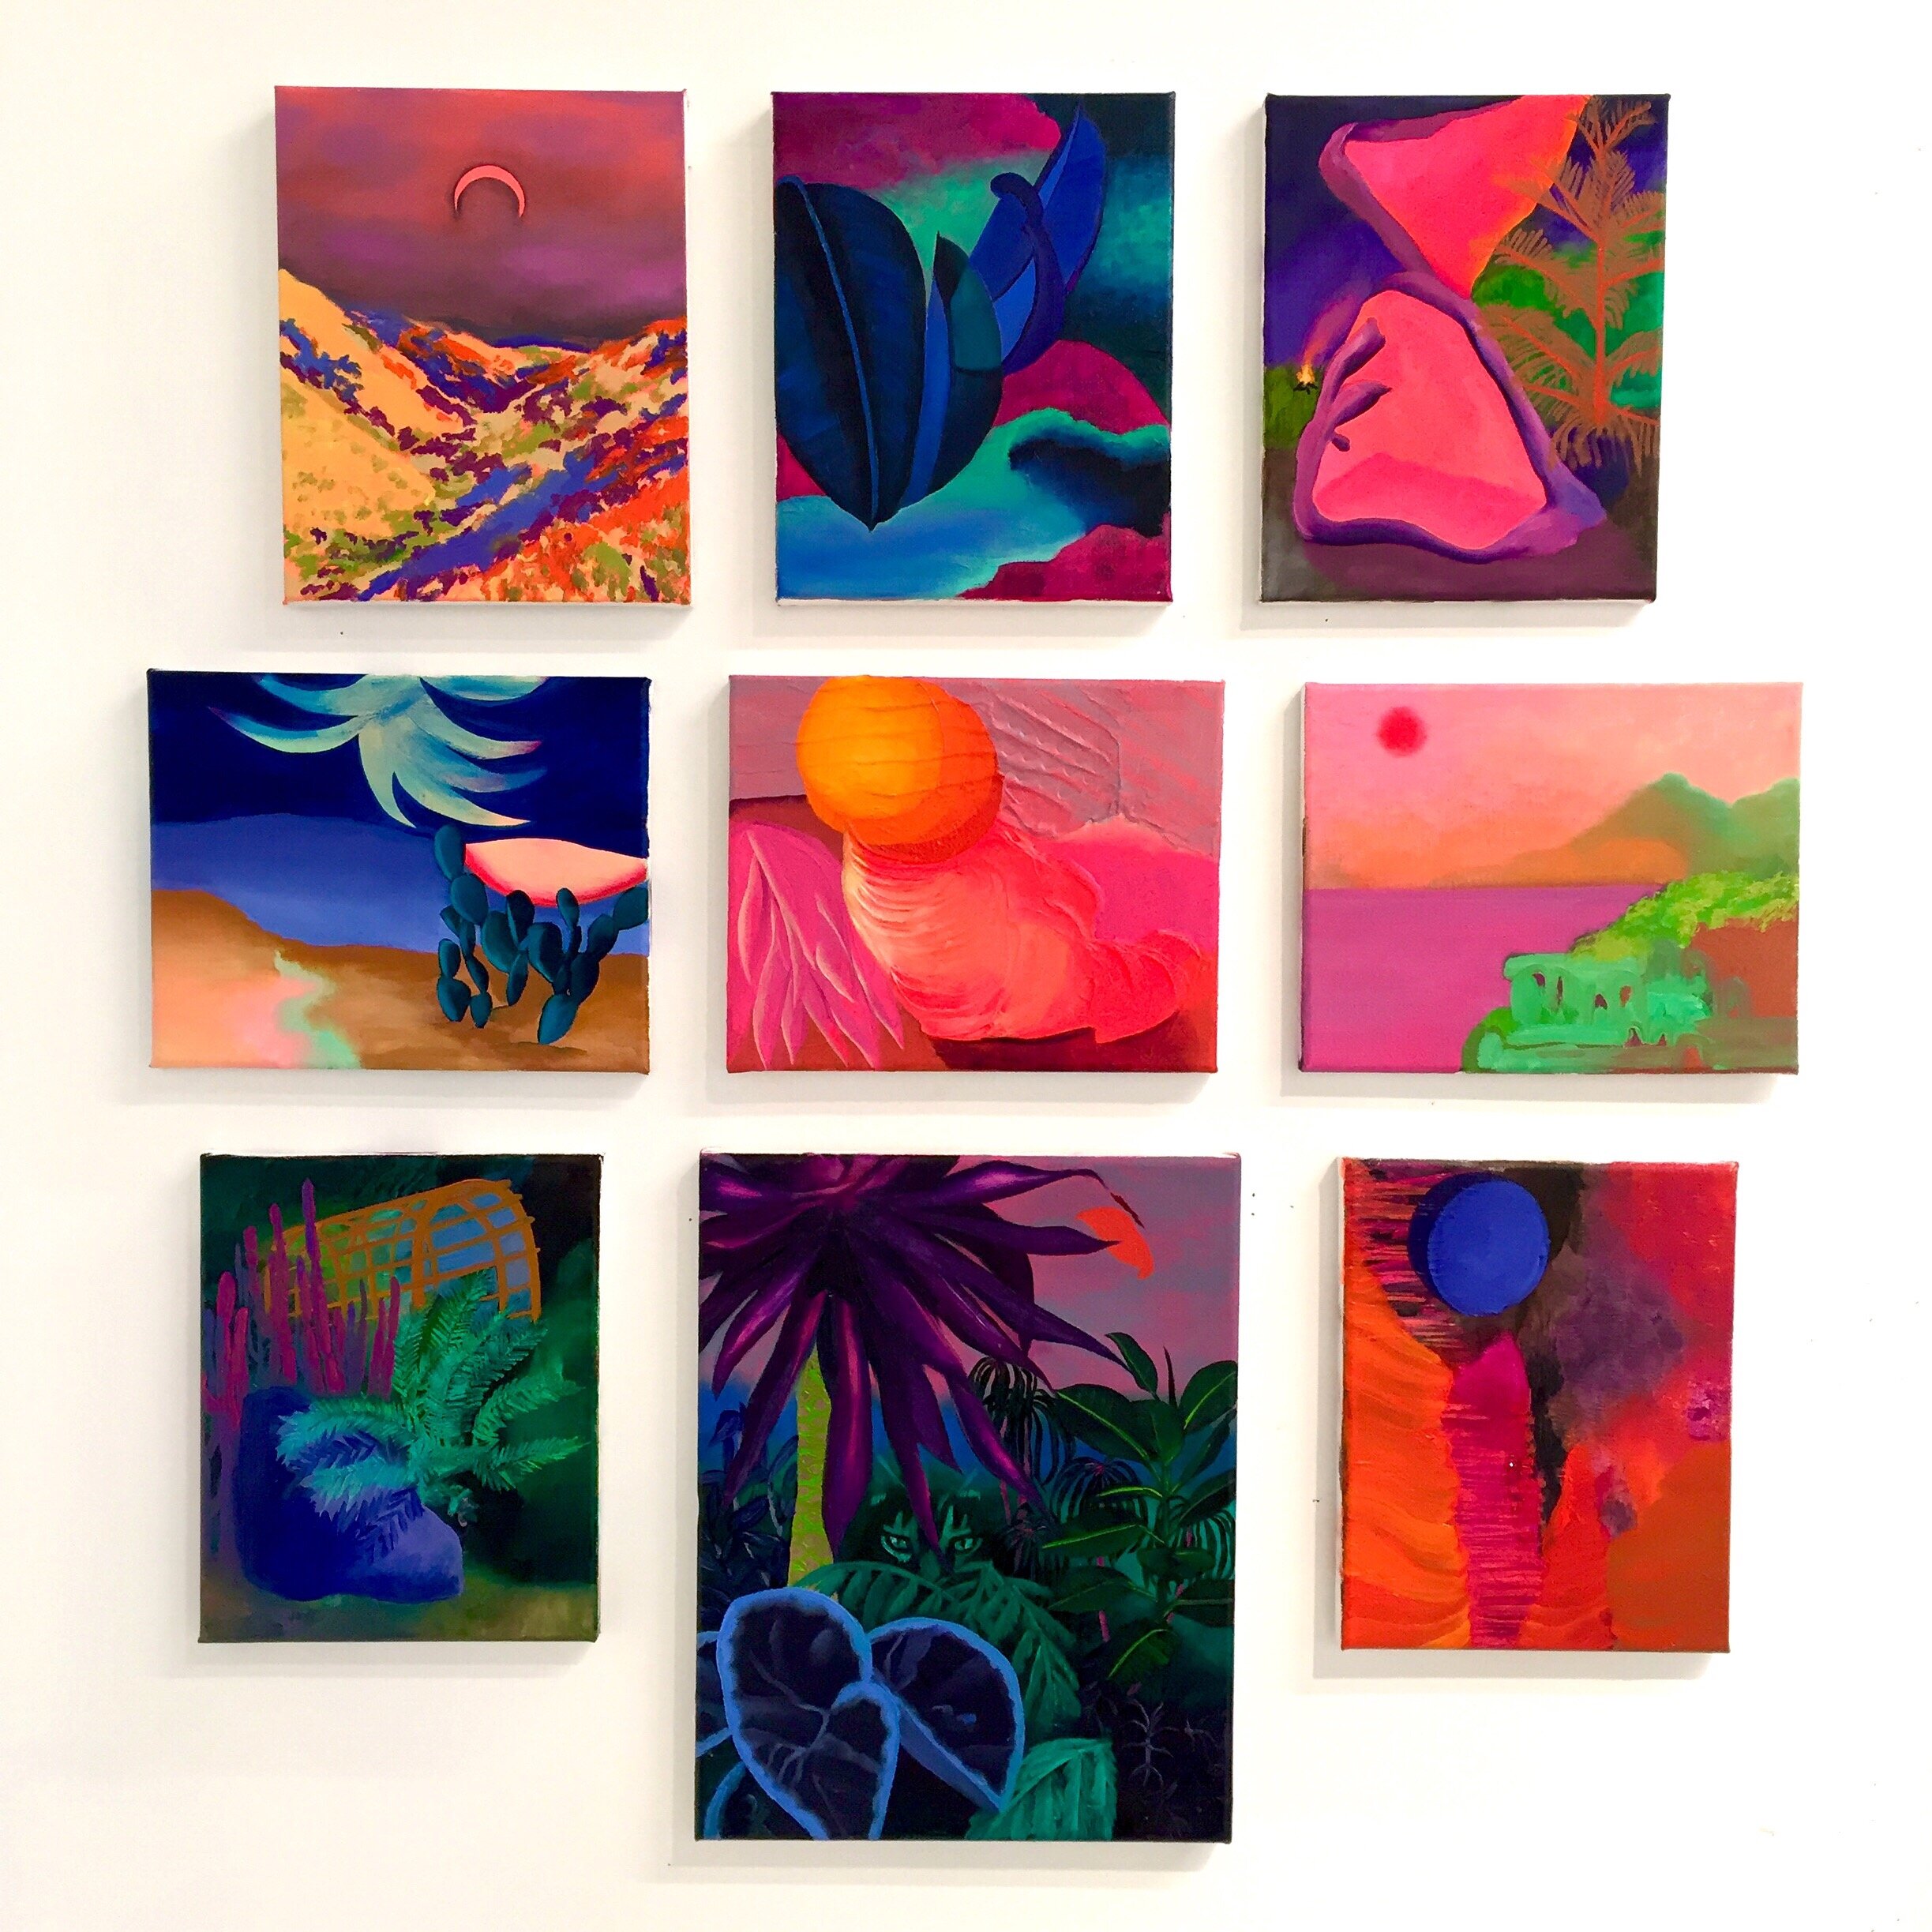  Group of small paintings, 2018-19, oil on canvas, 8 x 10 - 11 x 14” each 